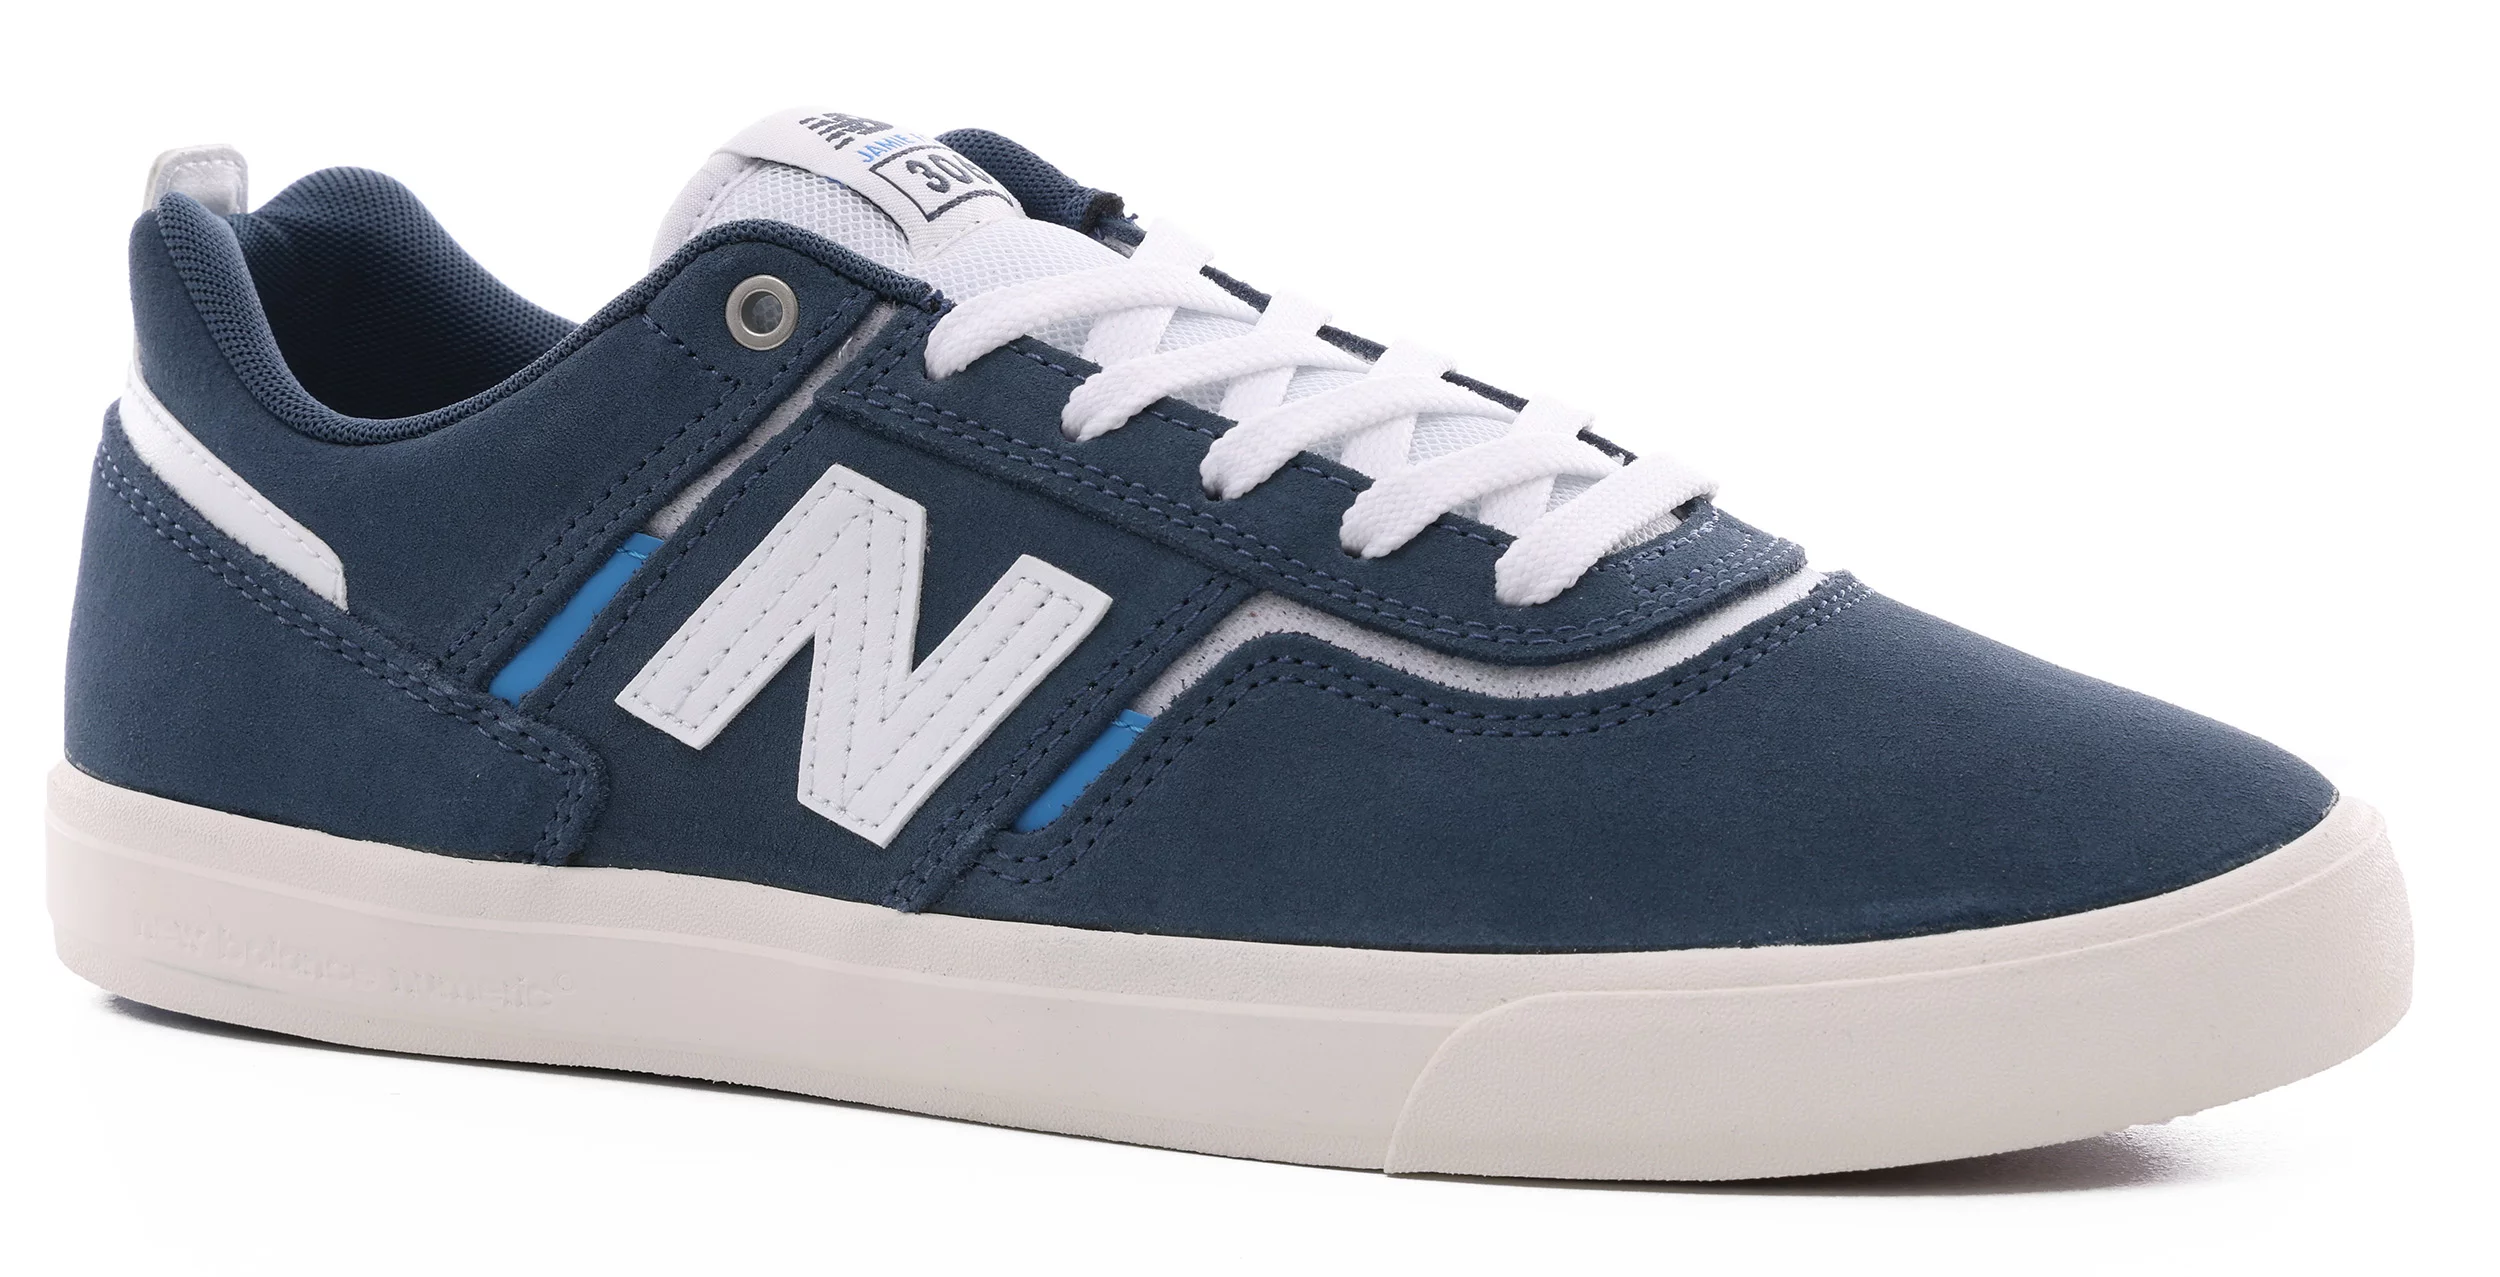 comerciante Afectar Compatible con New Balance Numeric 306 Skate Shoes - grey/white/blue - Free Shipping |  Tactics